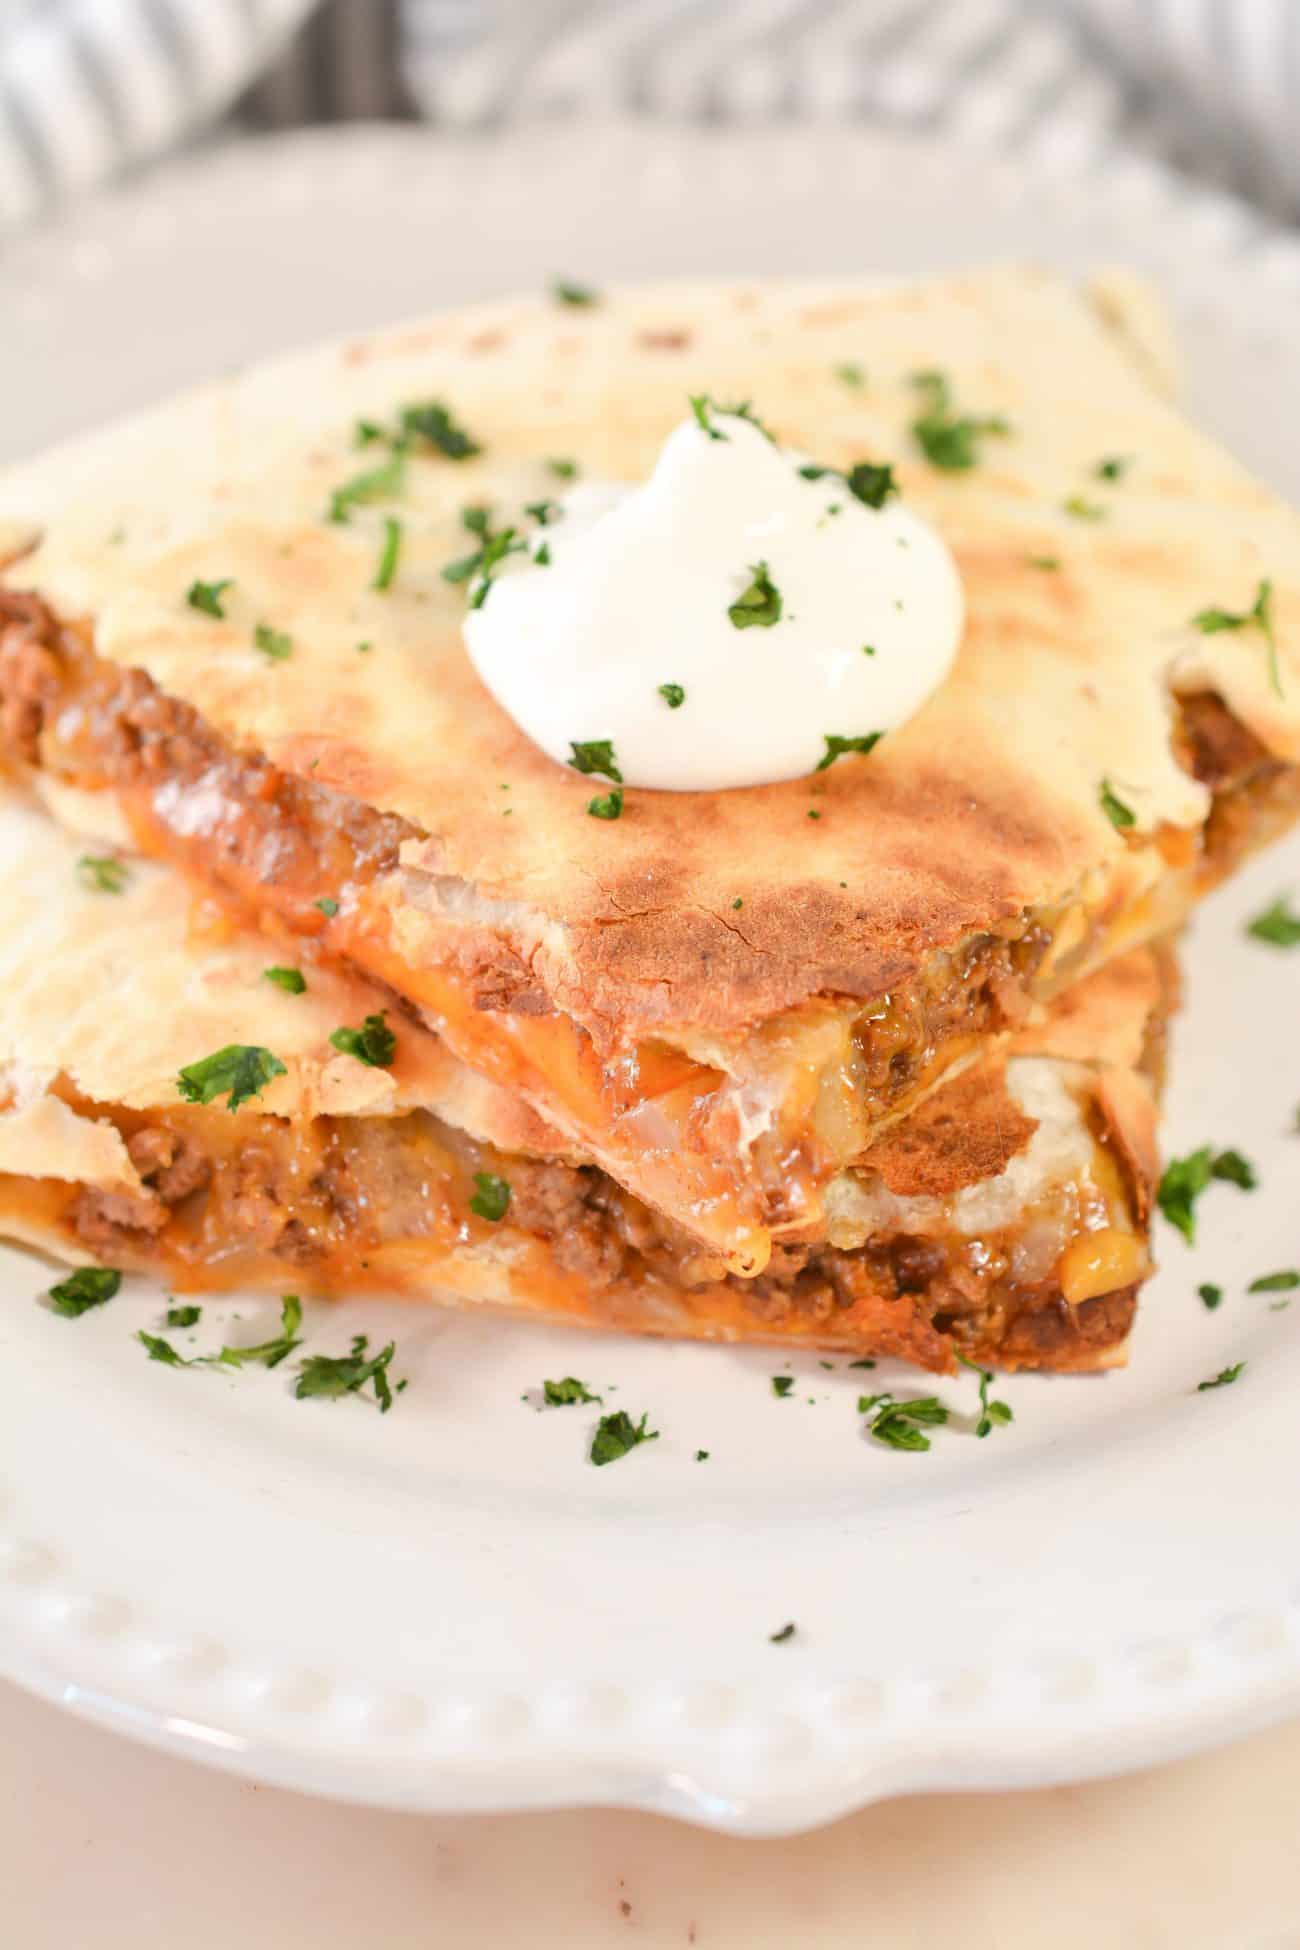 Beef and Cheese Quesadilla